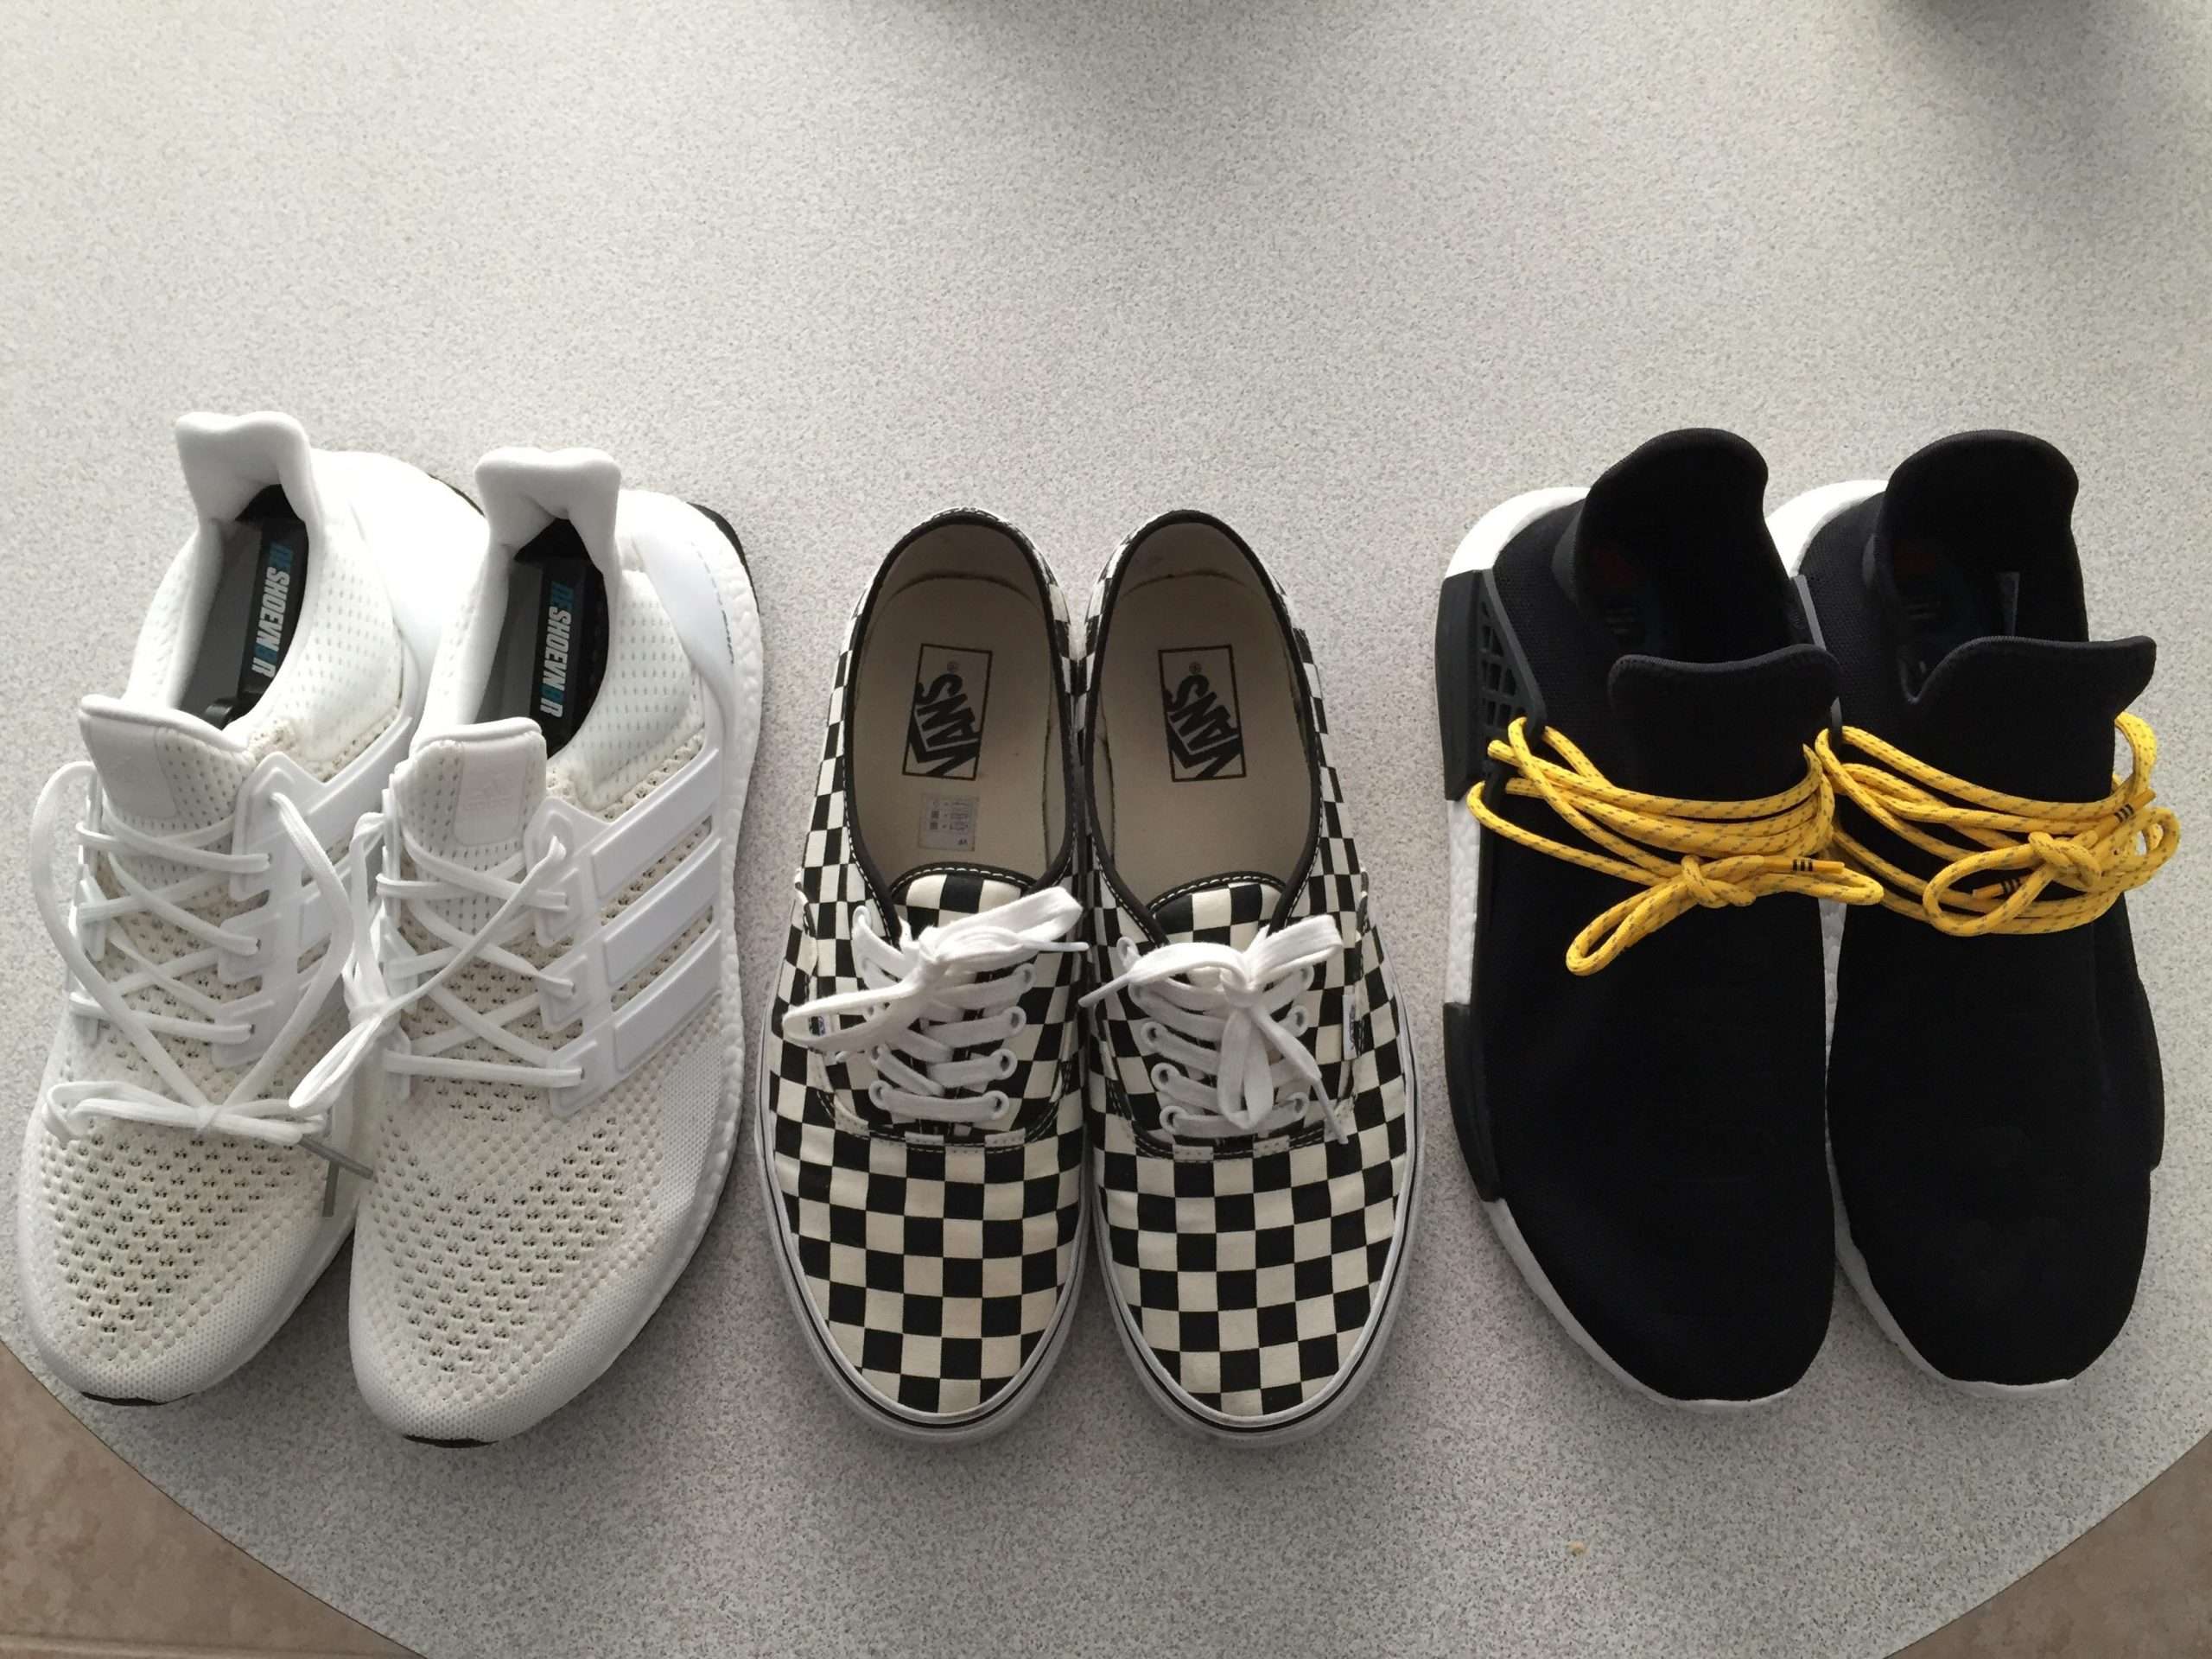 [pickups] Got all three for retail : Sneakers